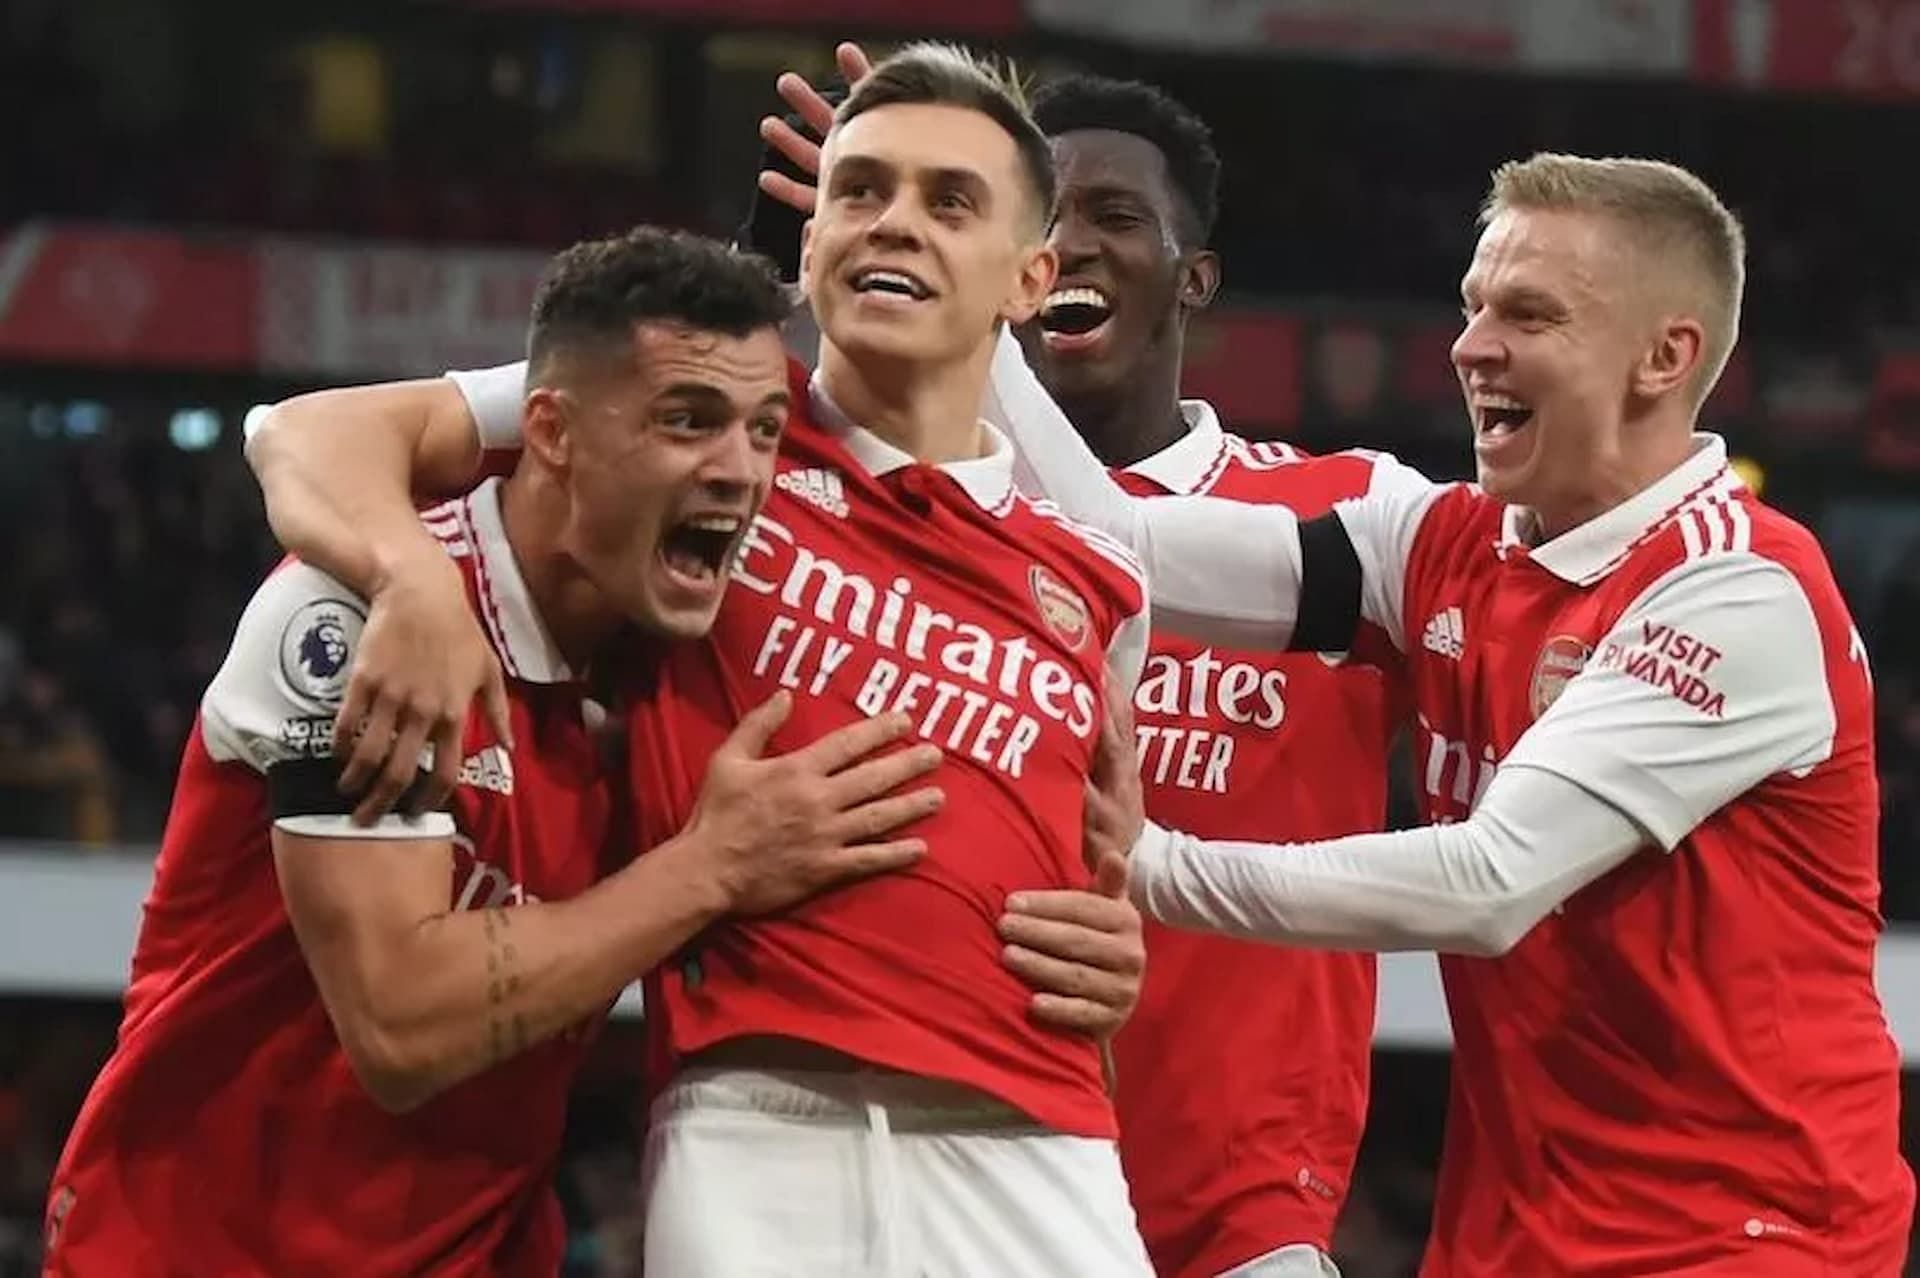 Arsenal will be a dominant side in the upcoming game title (Image via Getty)